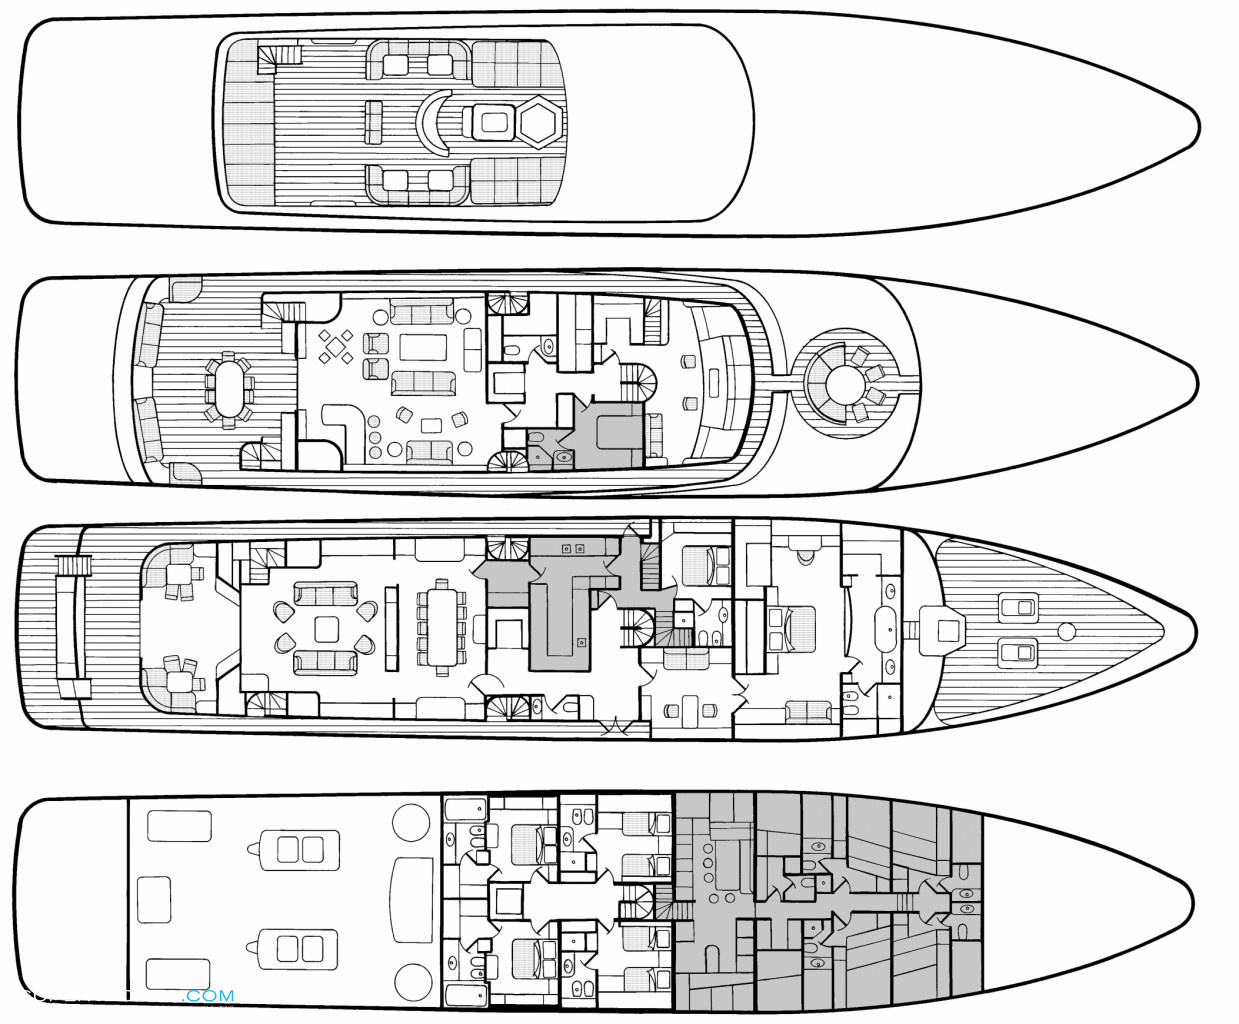 Superyacht Lady Ann Magee LAYOUT PLAN